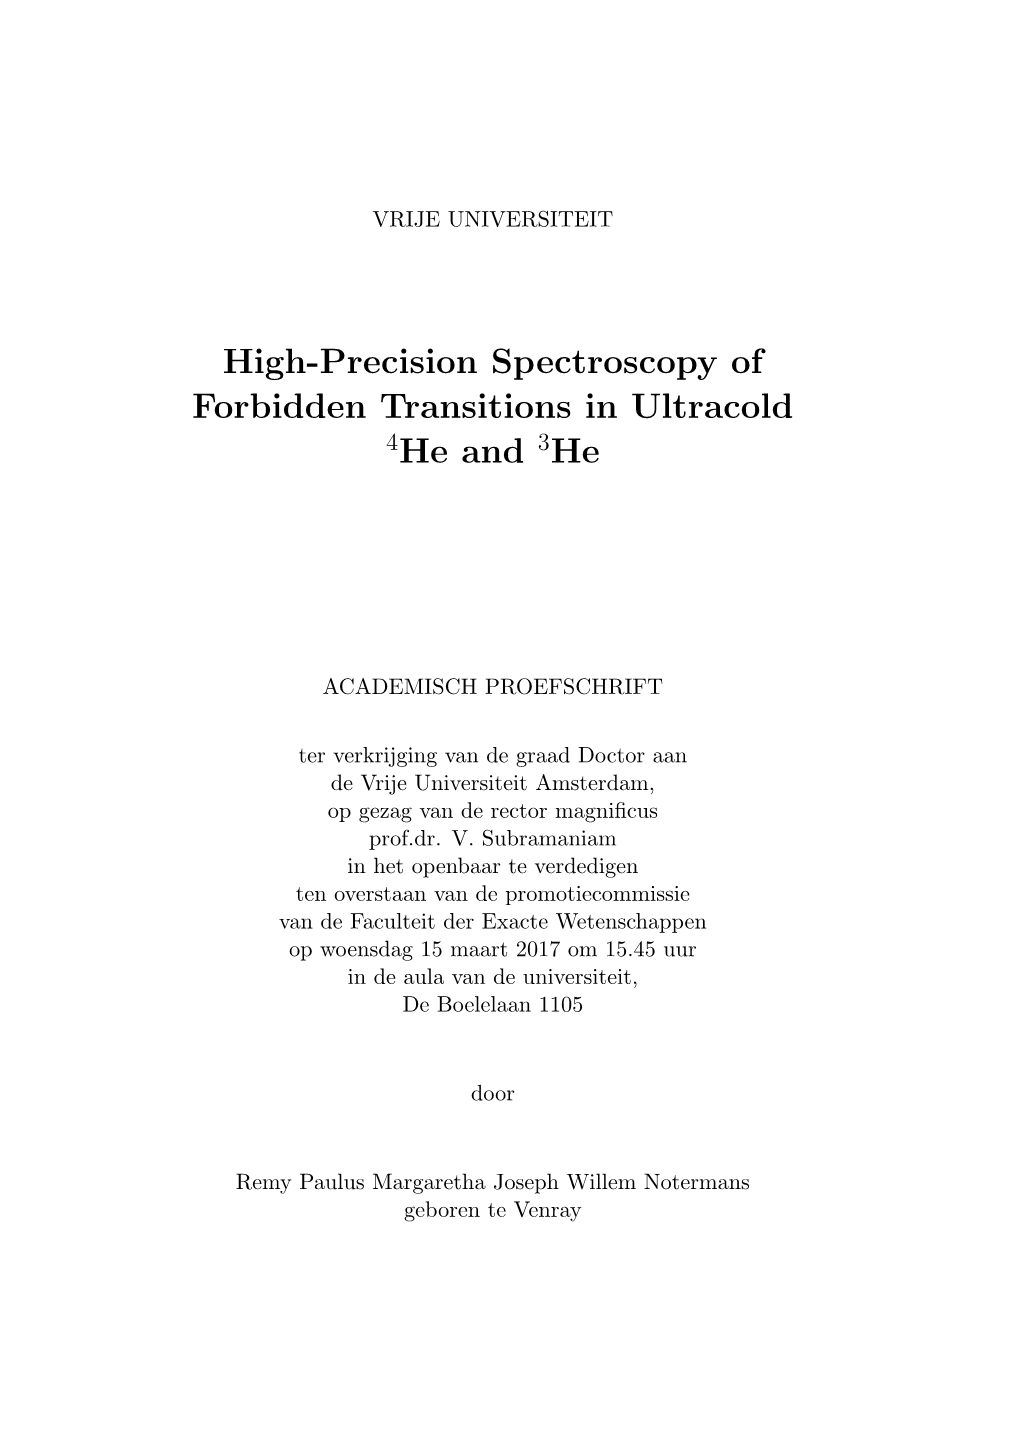 High-Precision Spectroscopy of Forbidden Transitions in Ultracold 4He and 3He